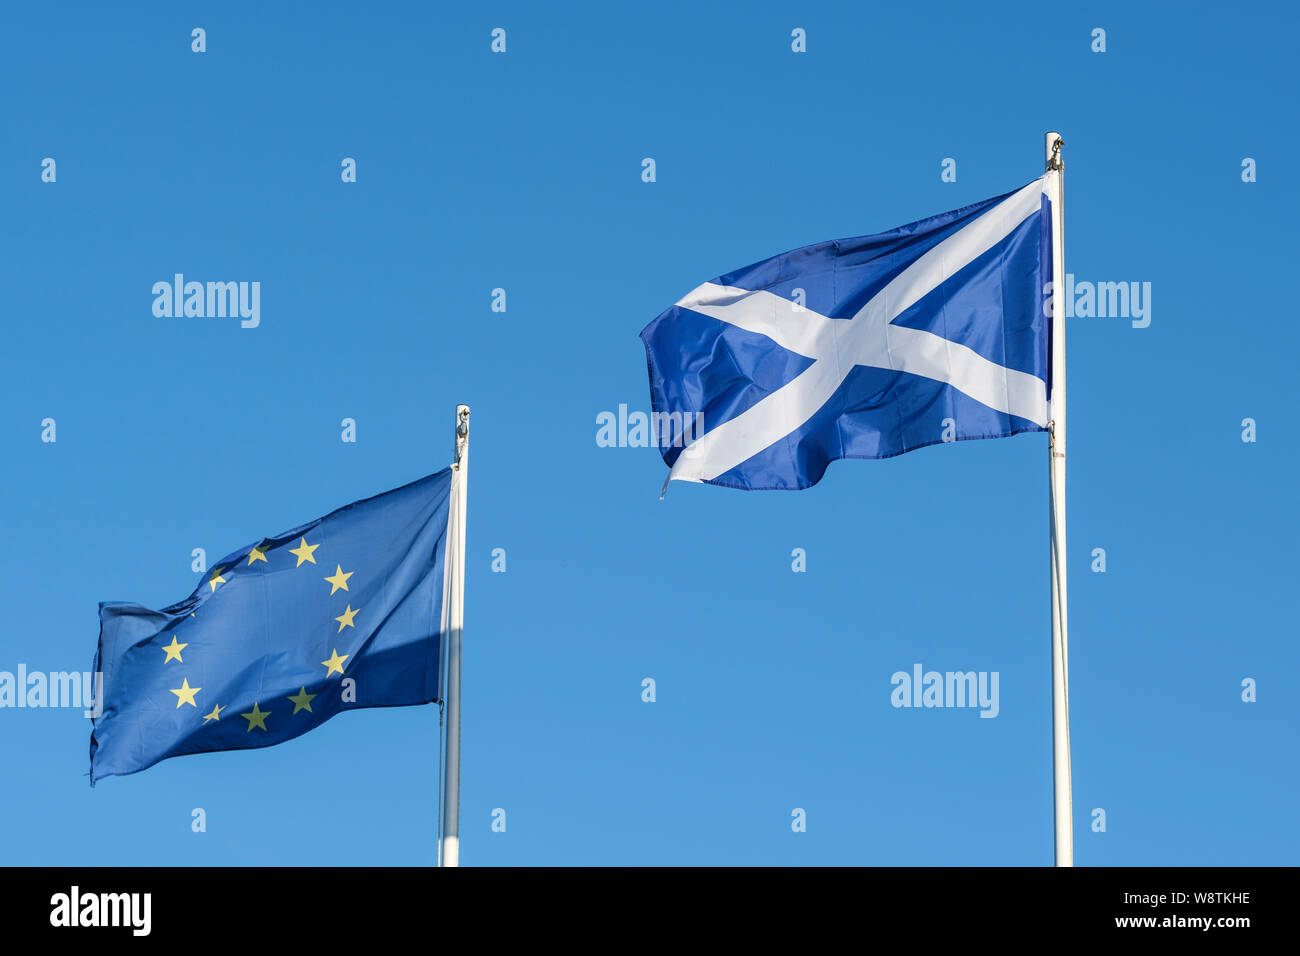 European flag circle of twelve five-pointed yellow stars on a blue field, Scotland flay with St Andrew's cross on blue background Stock Photo